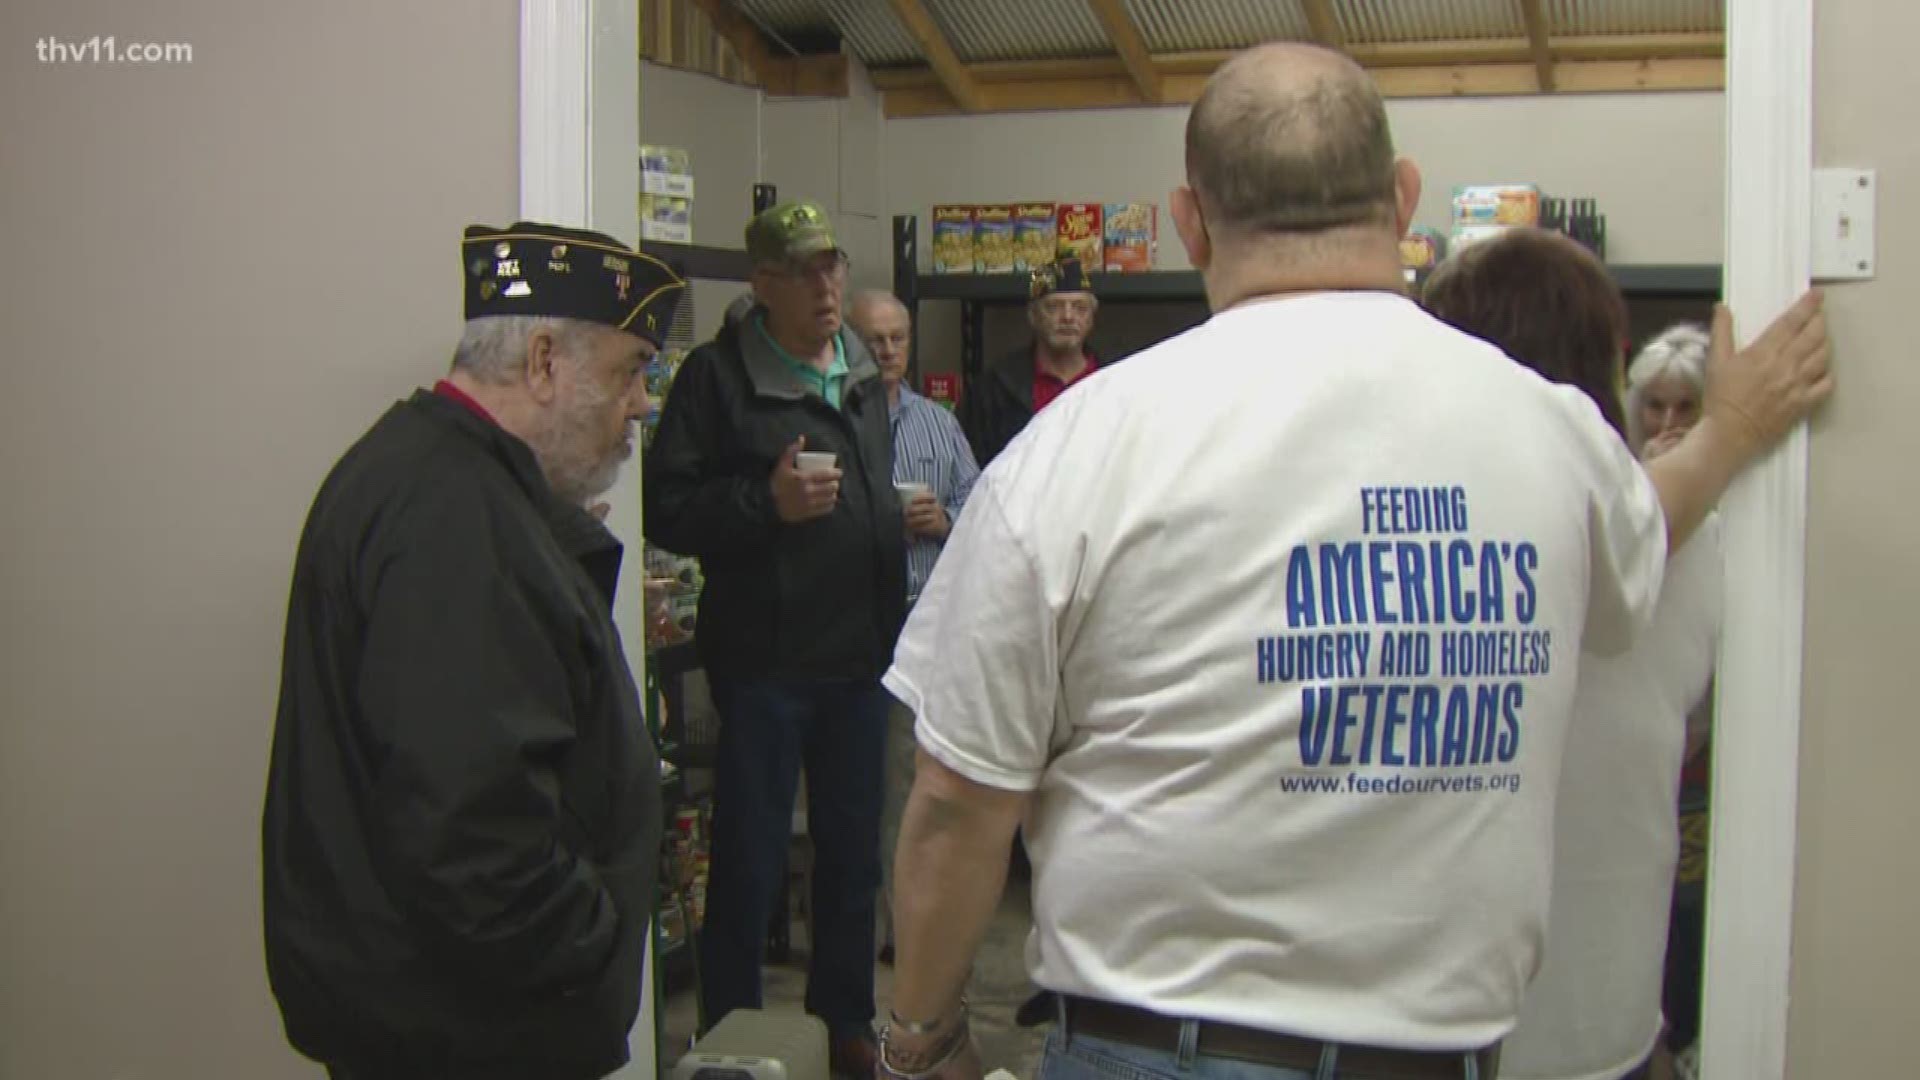 Feed Our Vets opened Arkansas's first food pantry designated for veterans.